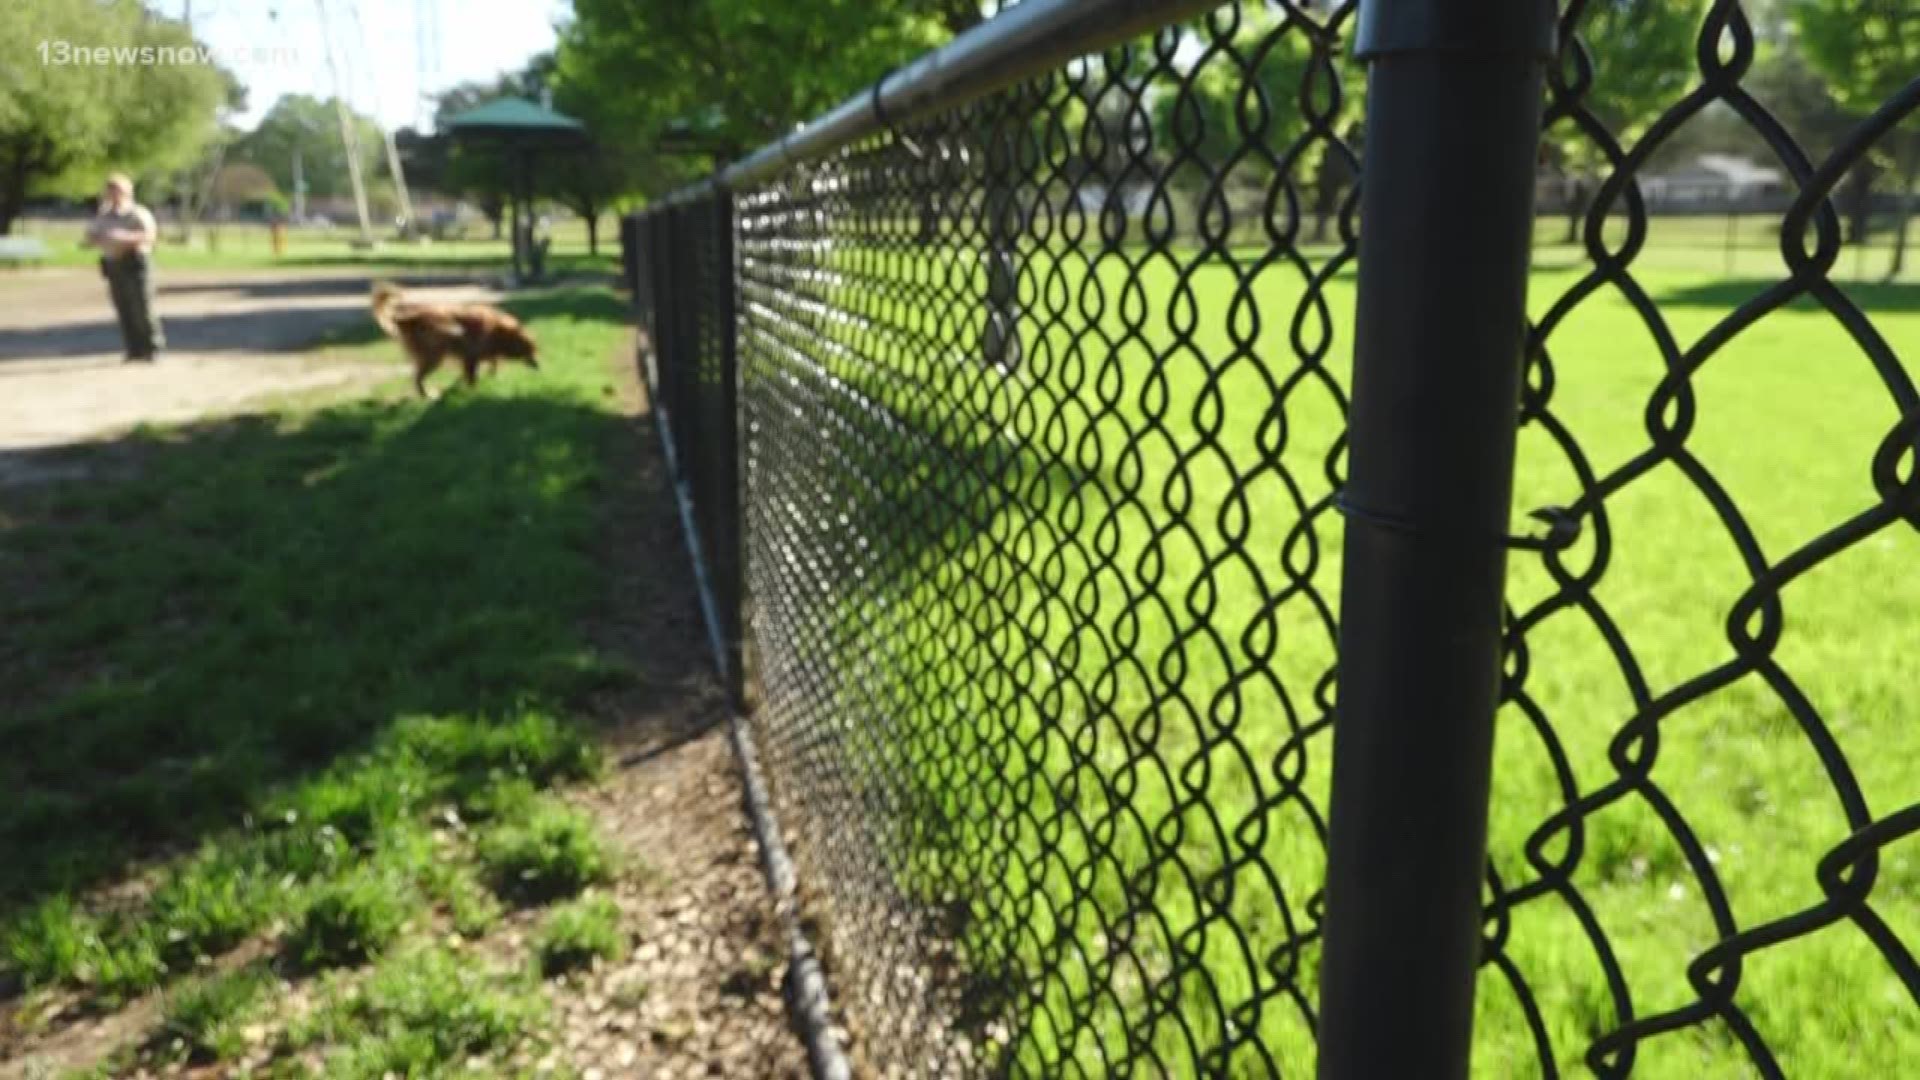 In this latest Bentley's Corner, 13News Now Tim Pandajis tackles dog park etiquette.